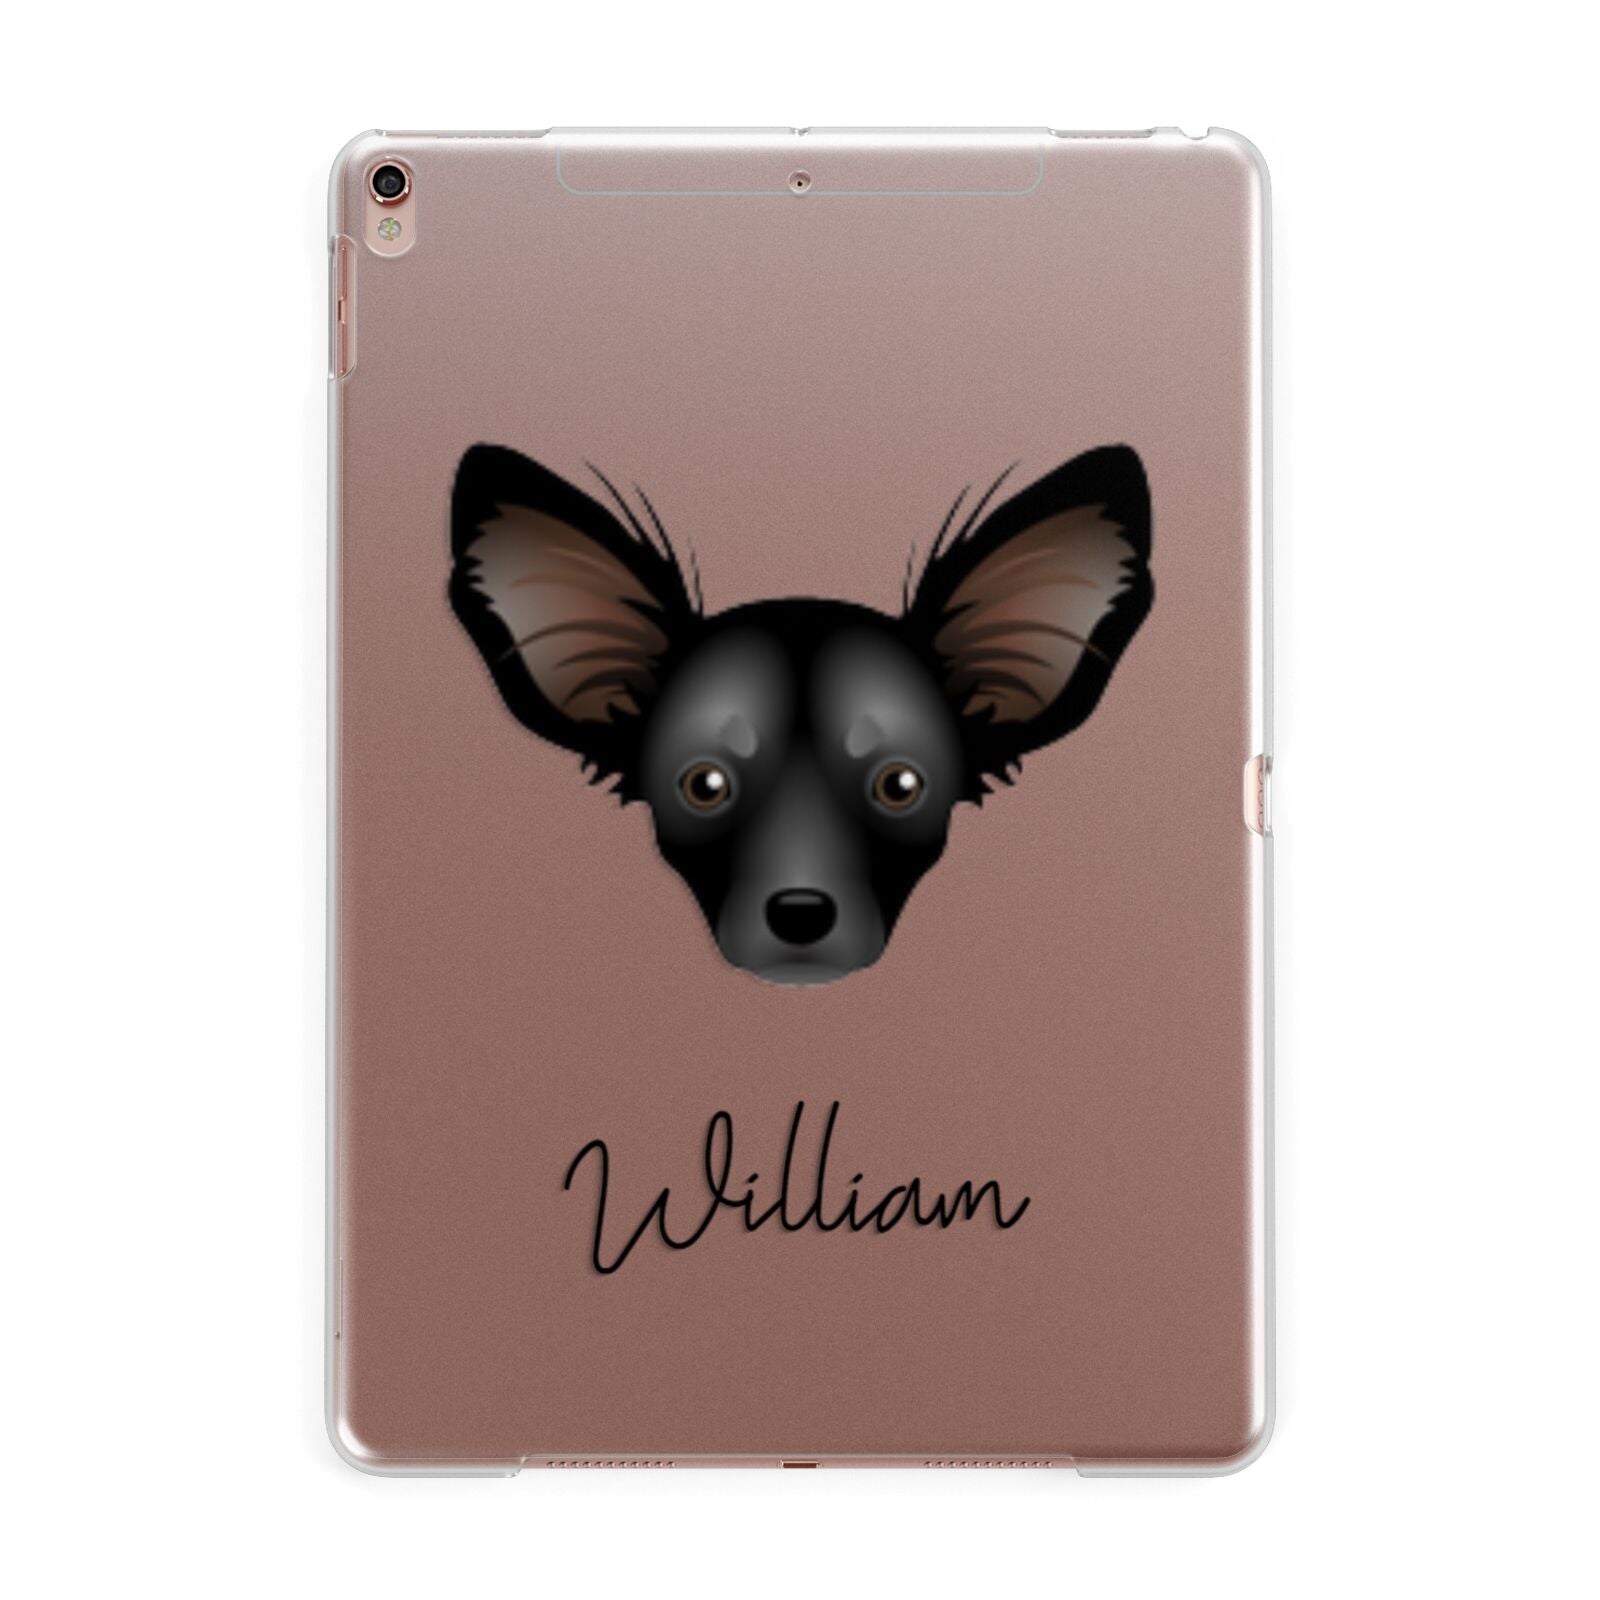 Russian Toy Personalised Apple iPad Rose Gold Case